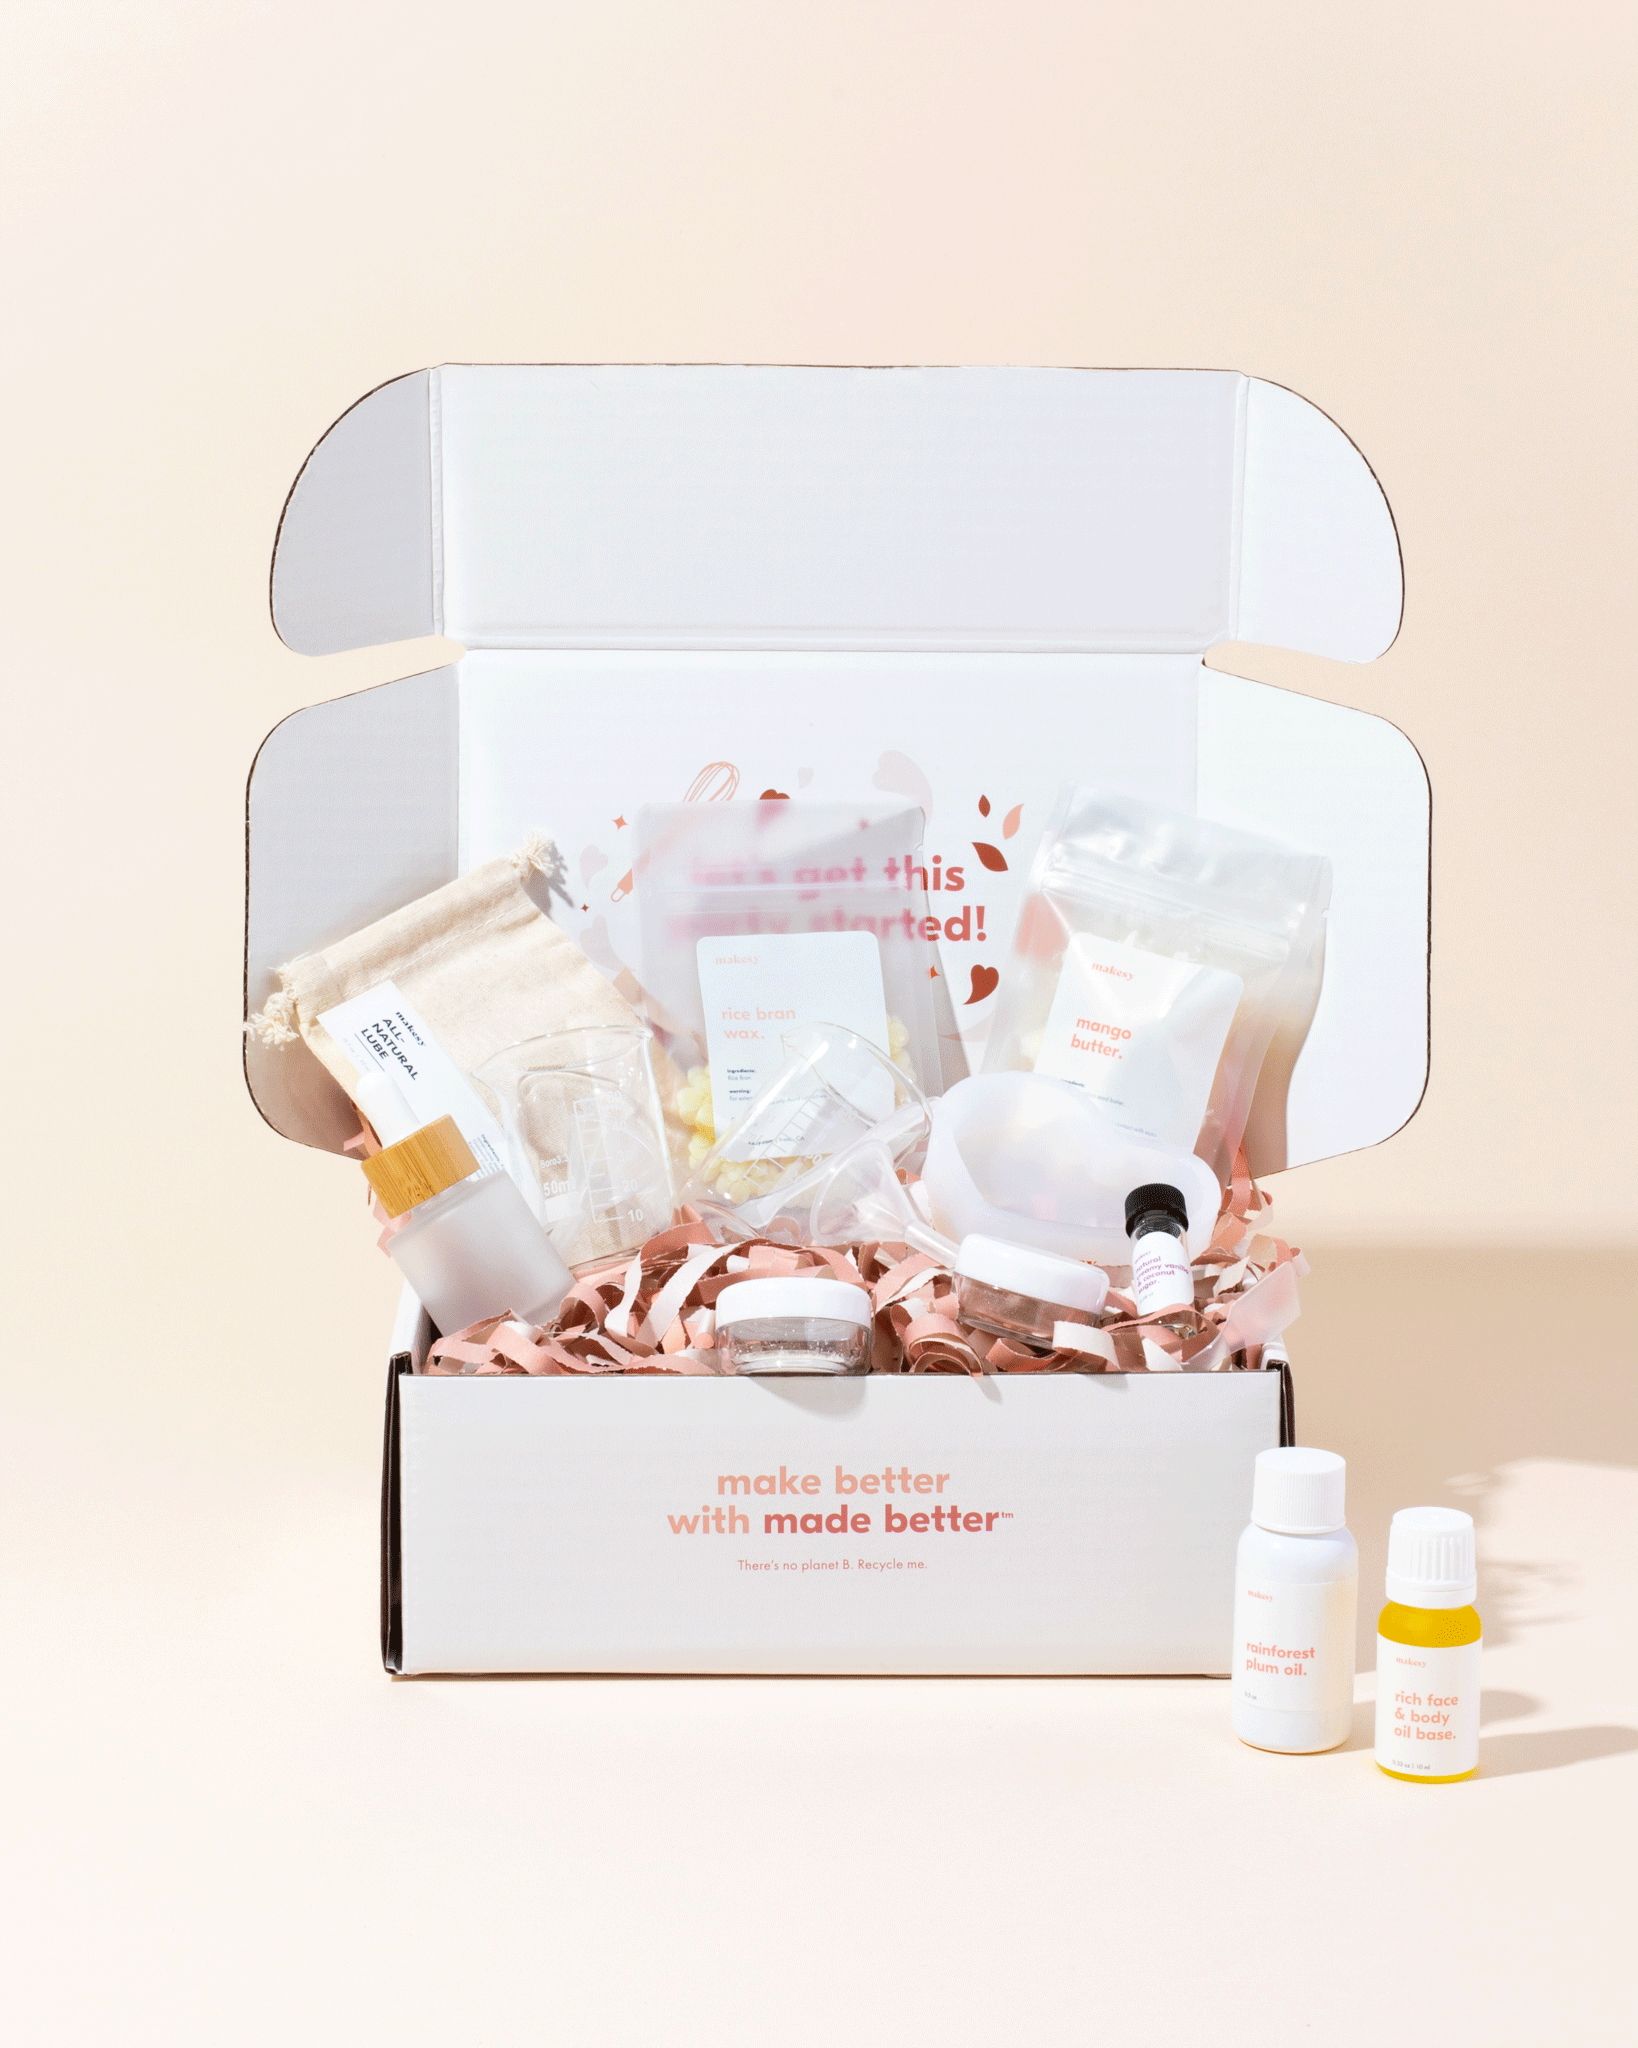 makesy Calm & Collected DIY Candle Kit